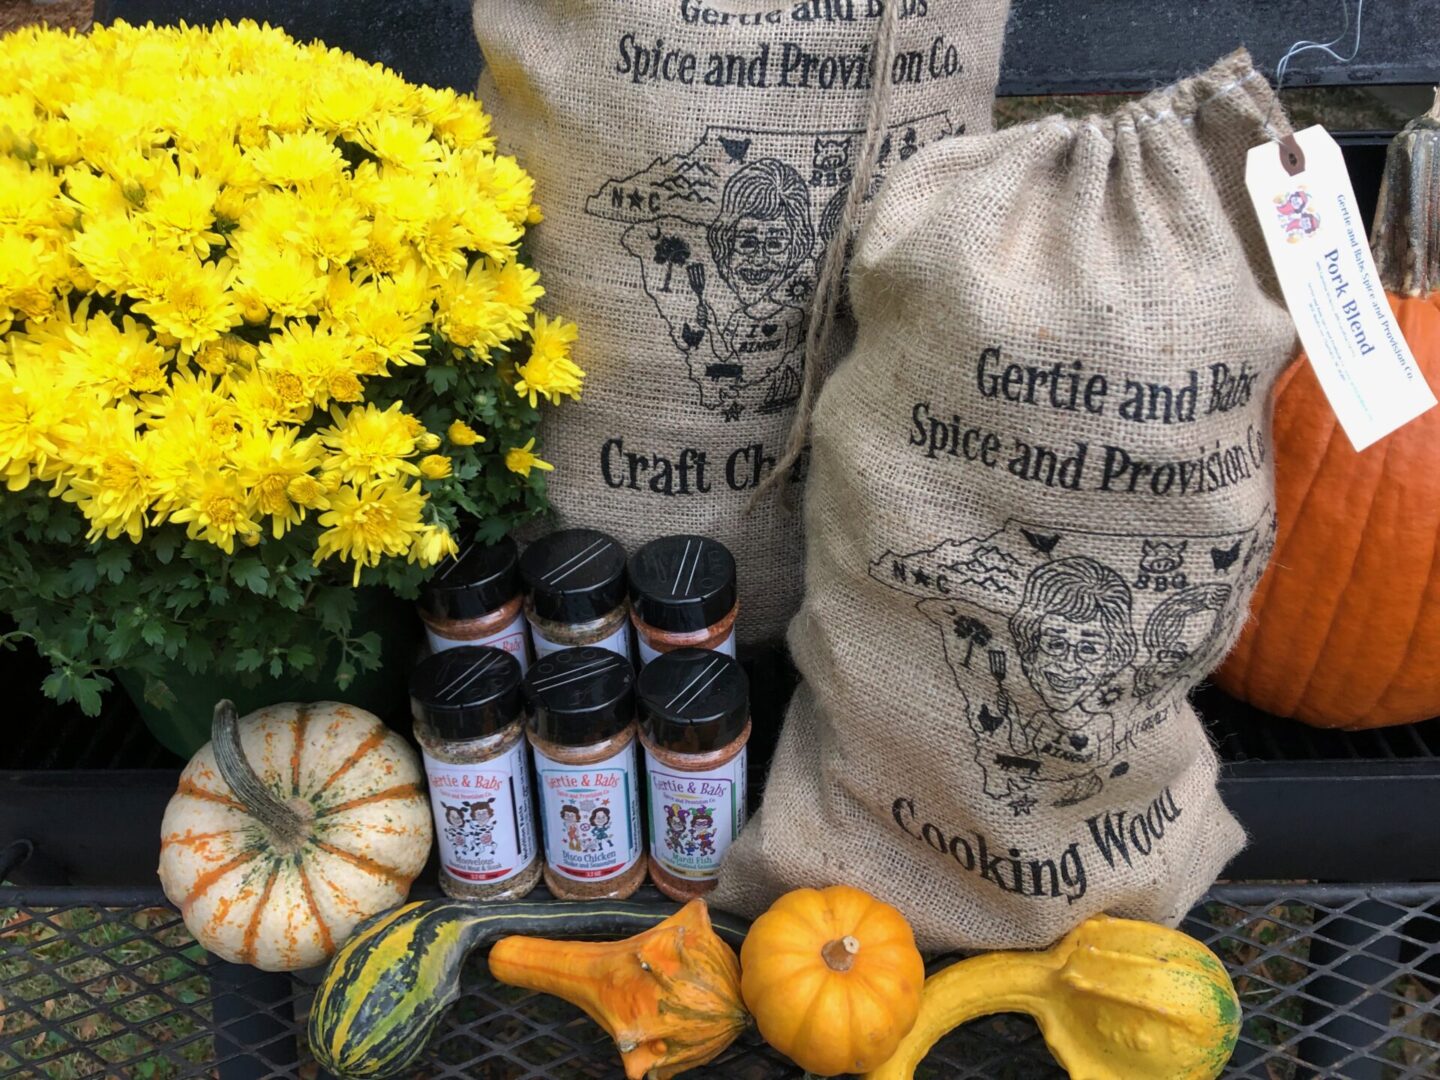 Gourds, flowers, and sacks of Gertie and Ray's spices.